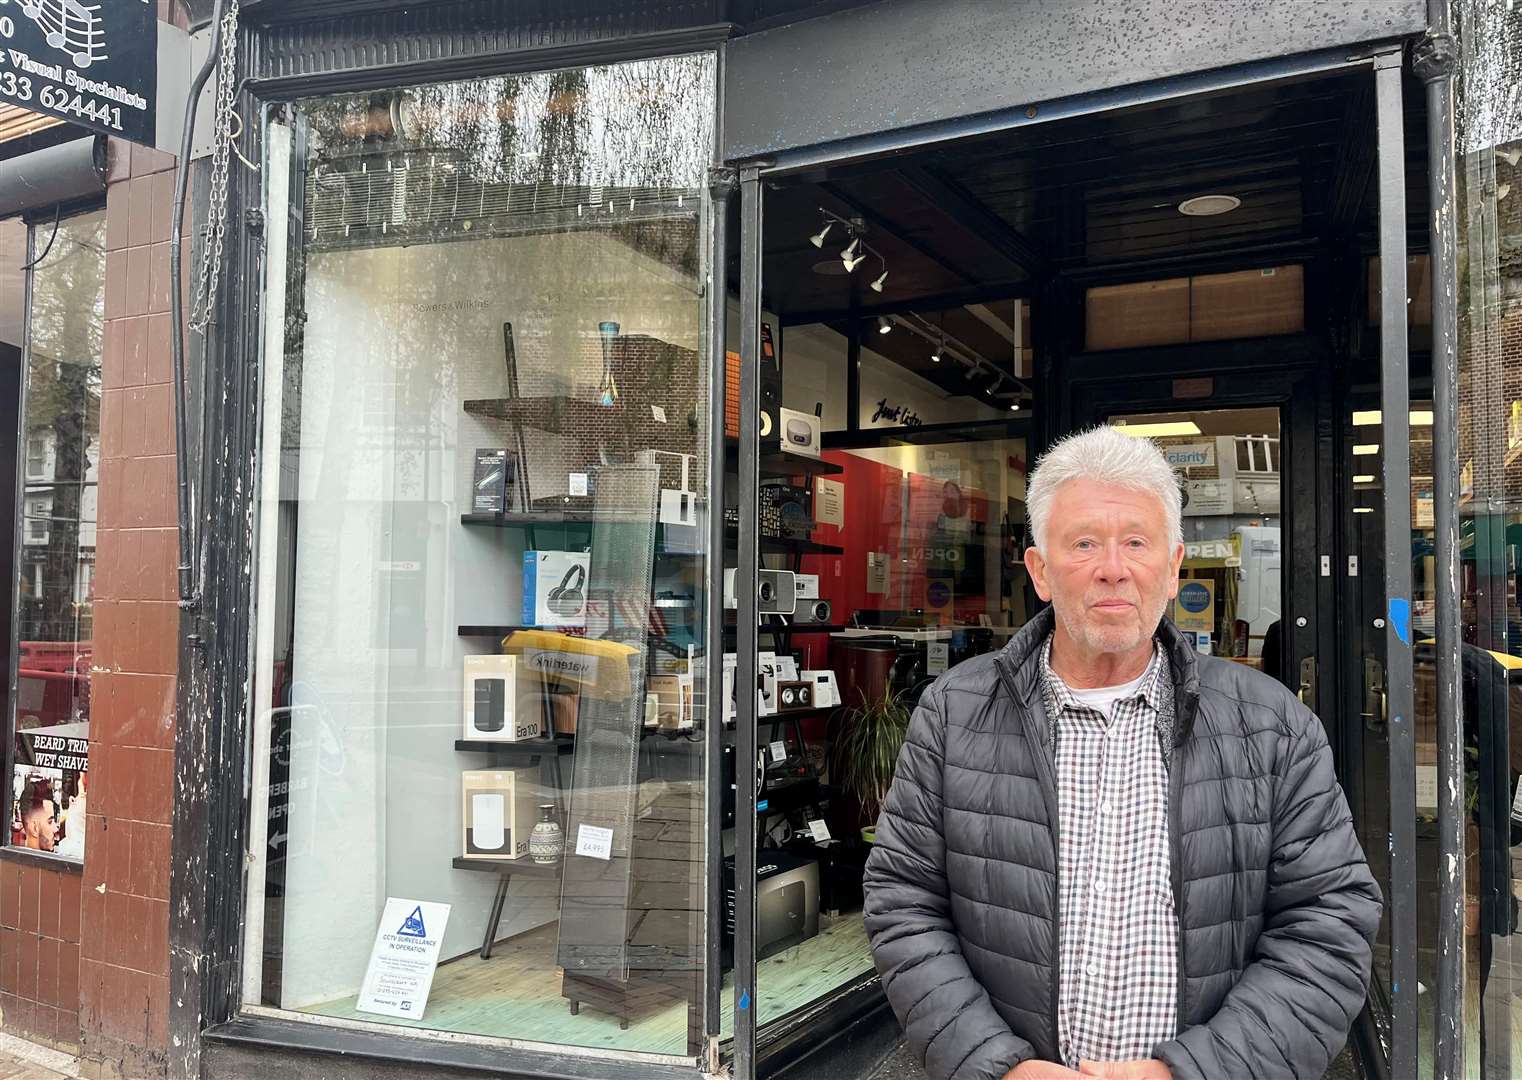 Geoff Mathews, owner of Soundcraft Hi-Fi store in the Lower High Street